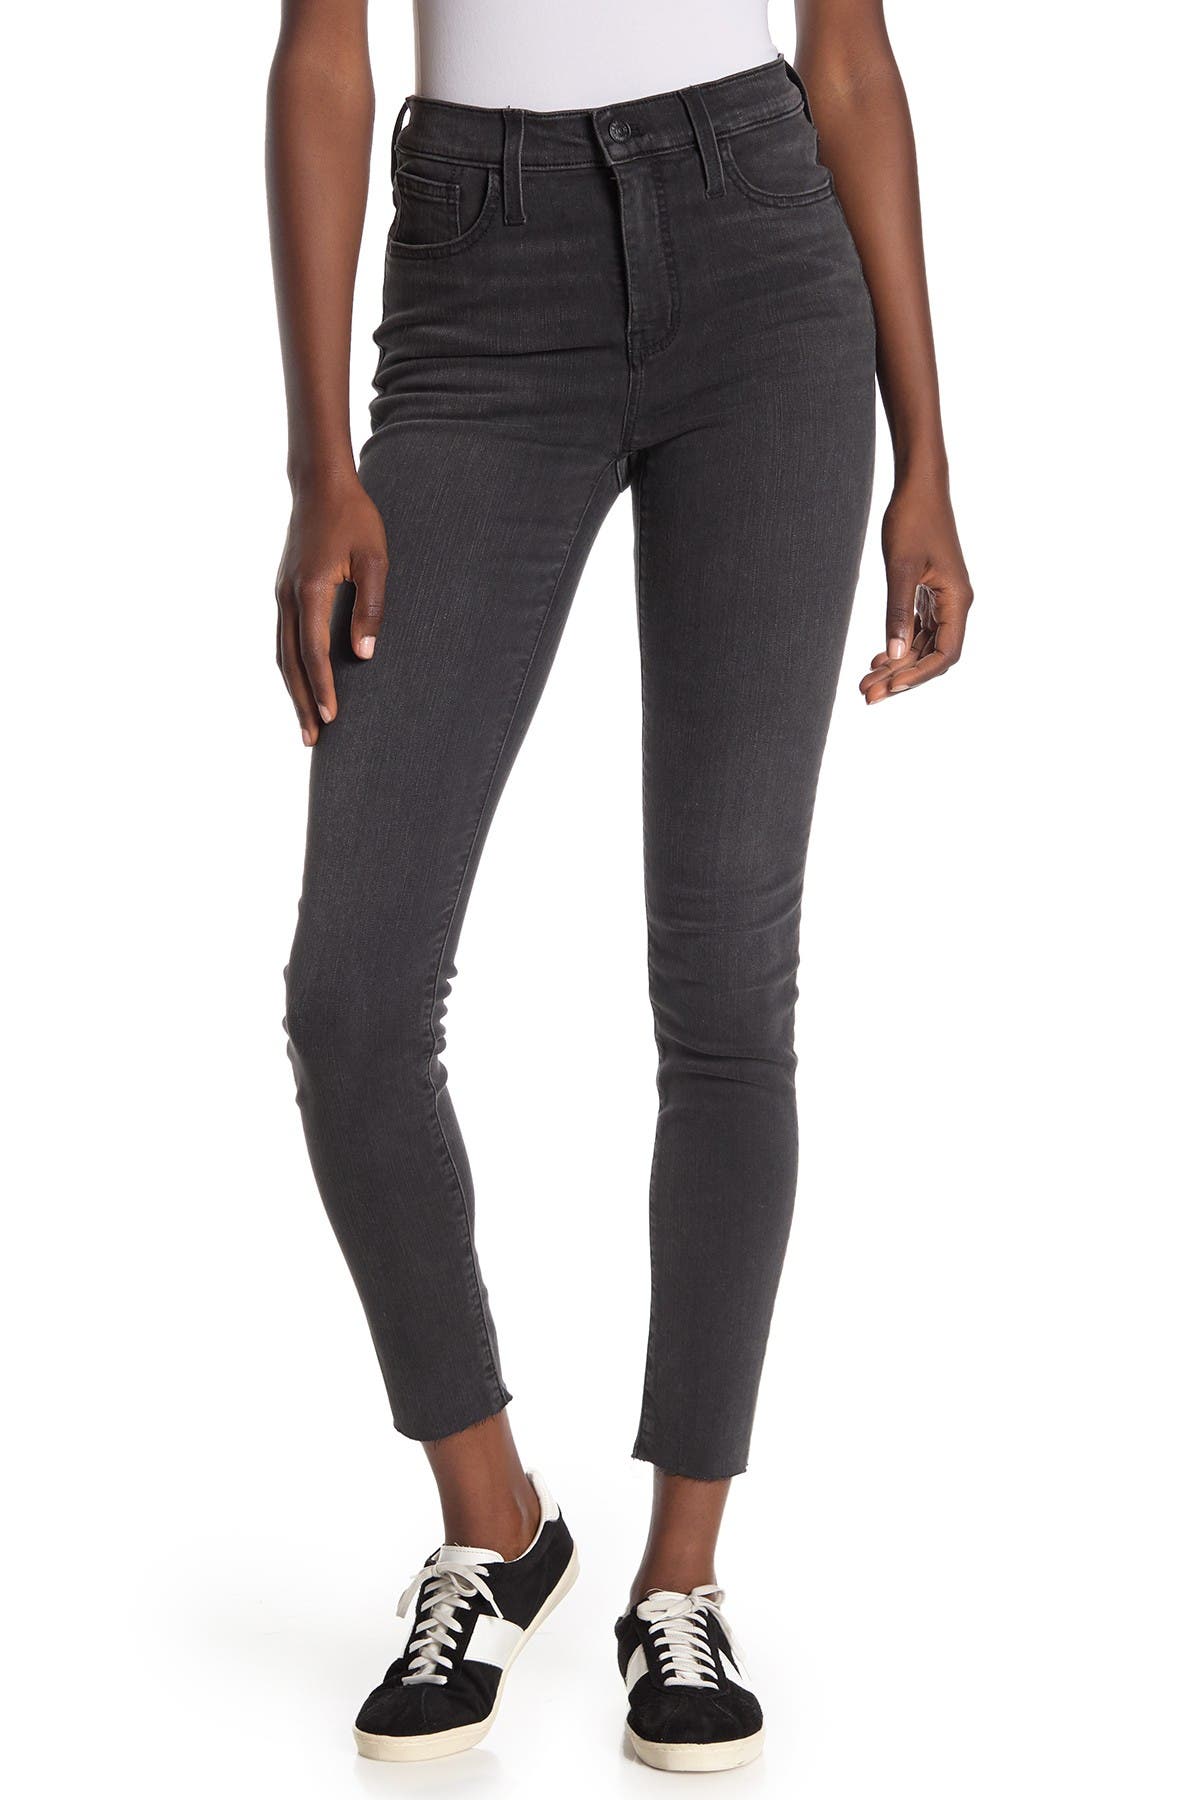 Madewell | Washed Black 9-inch Midrise 